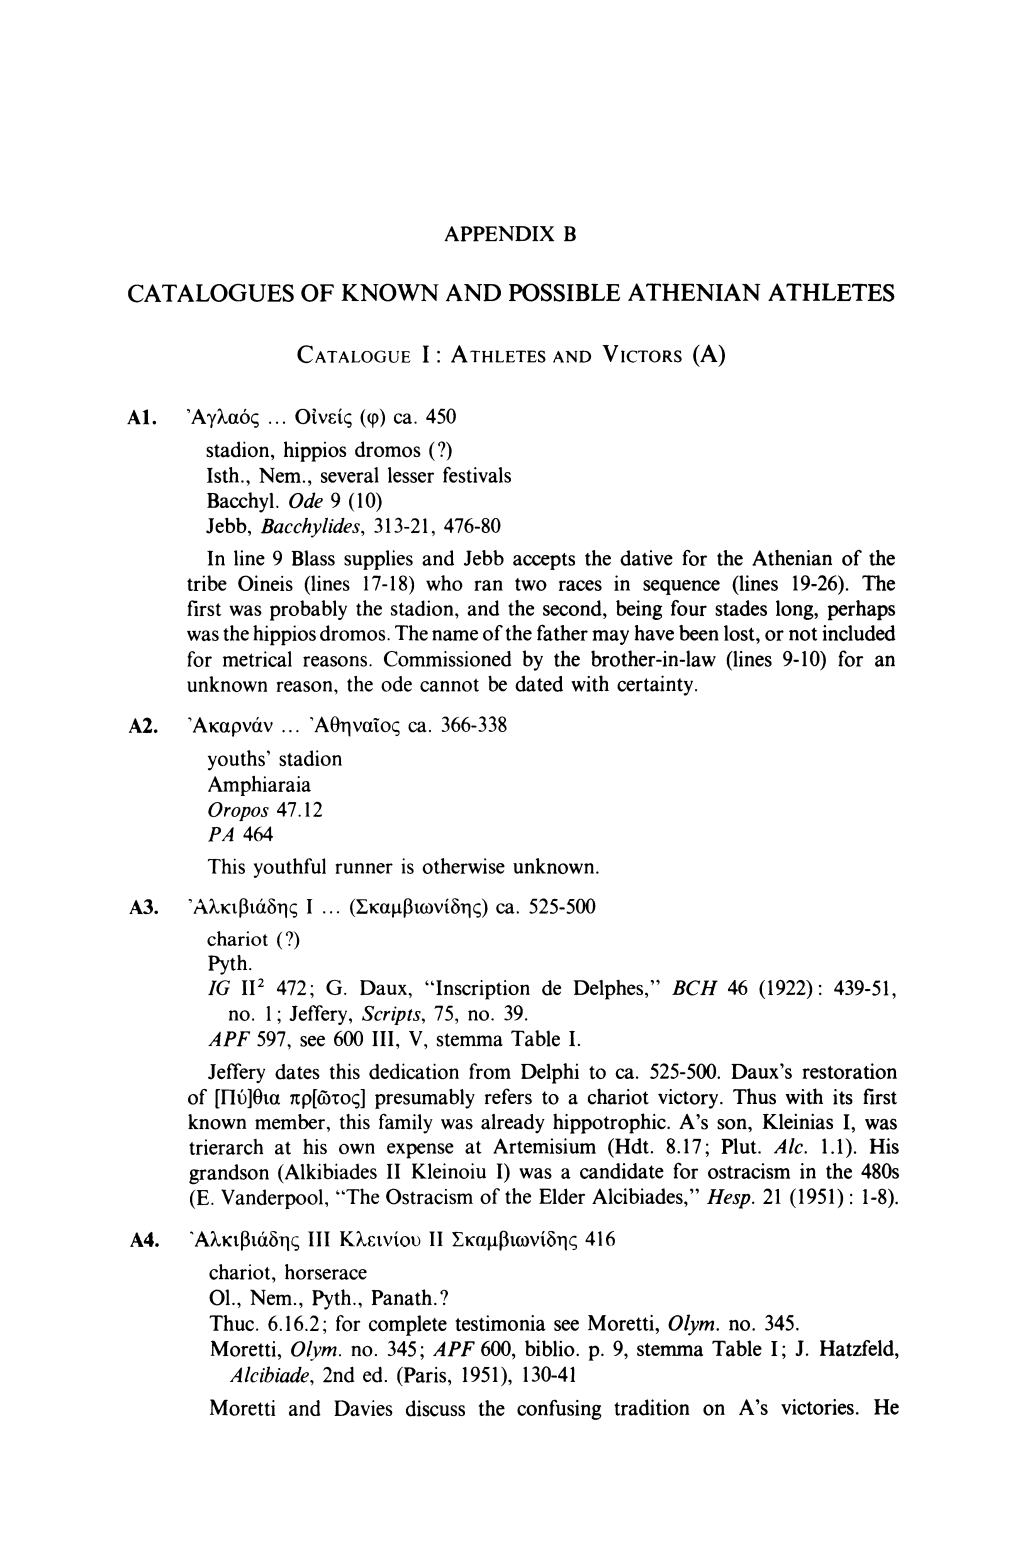 Catalogues of Known and Possible Athenian Athletes